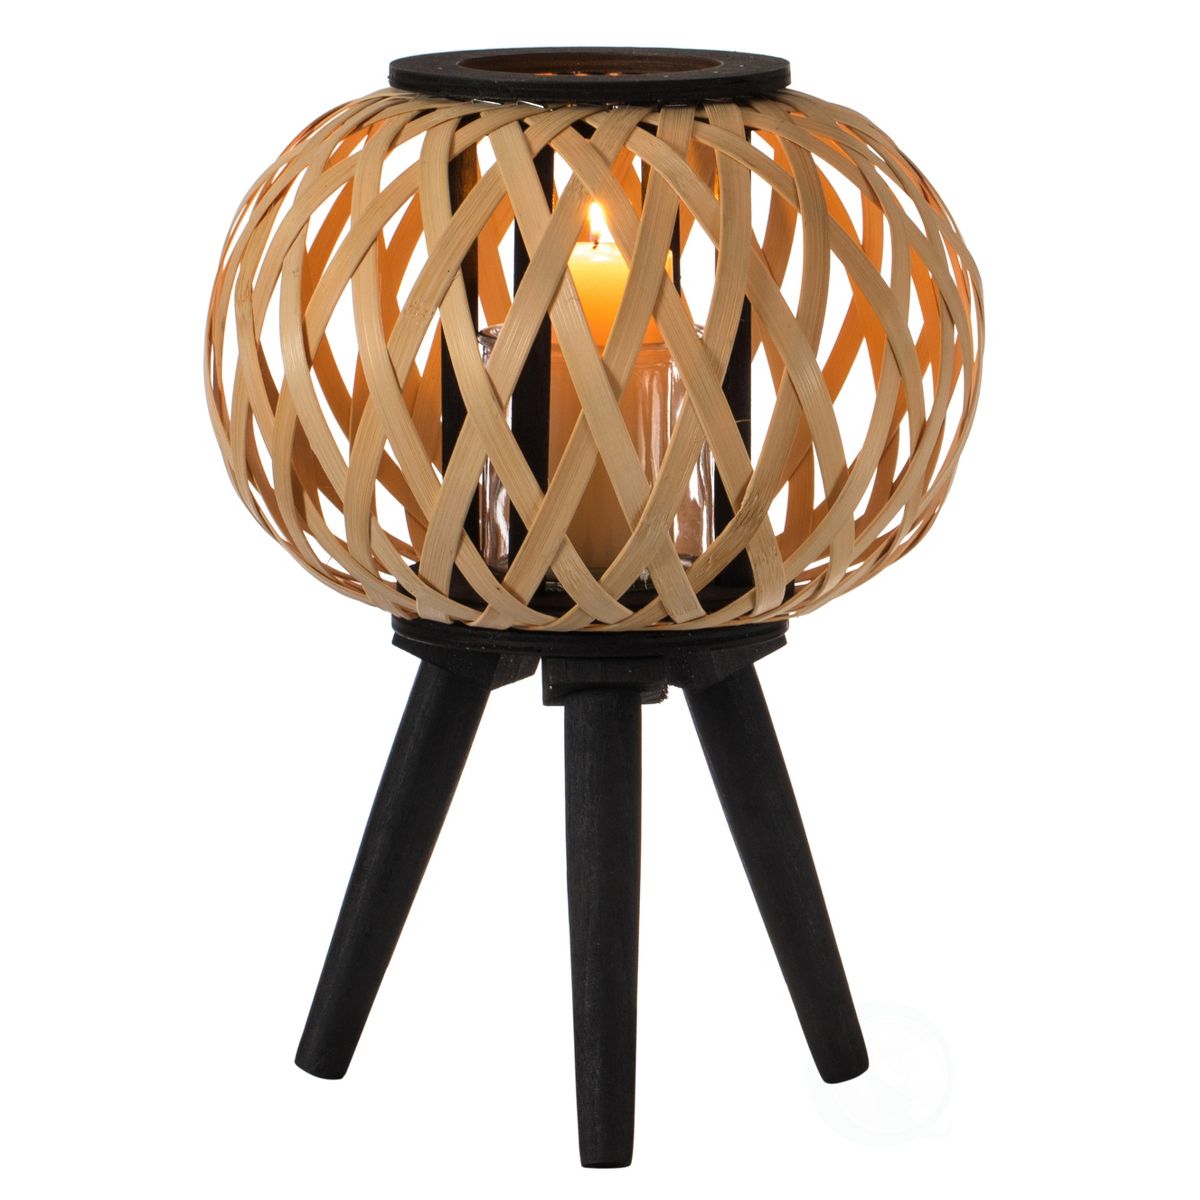 Bamboo Lantern | Searching for stunning patio inspiration? These 9 outdoor essentials will bring your tiny patio over the top.